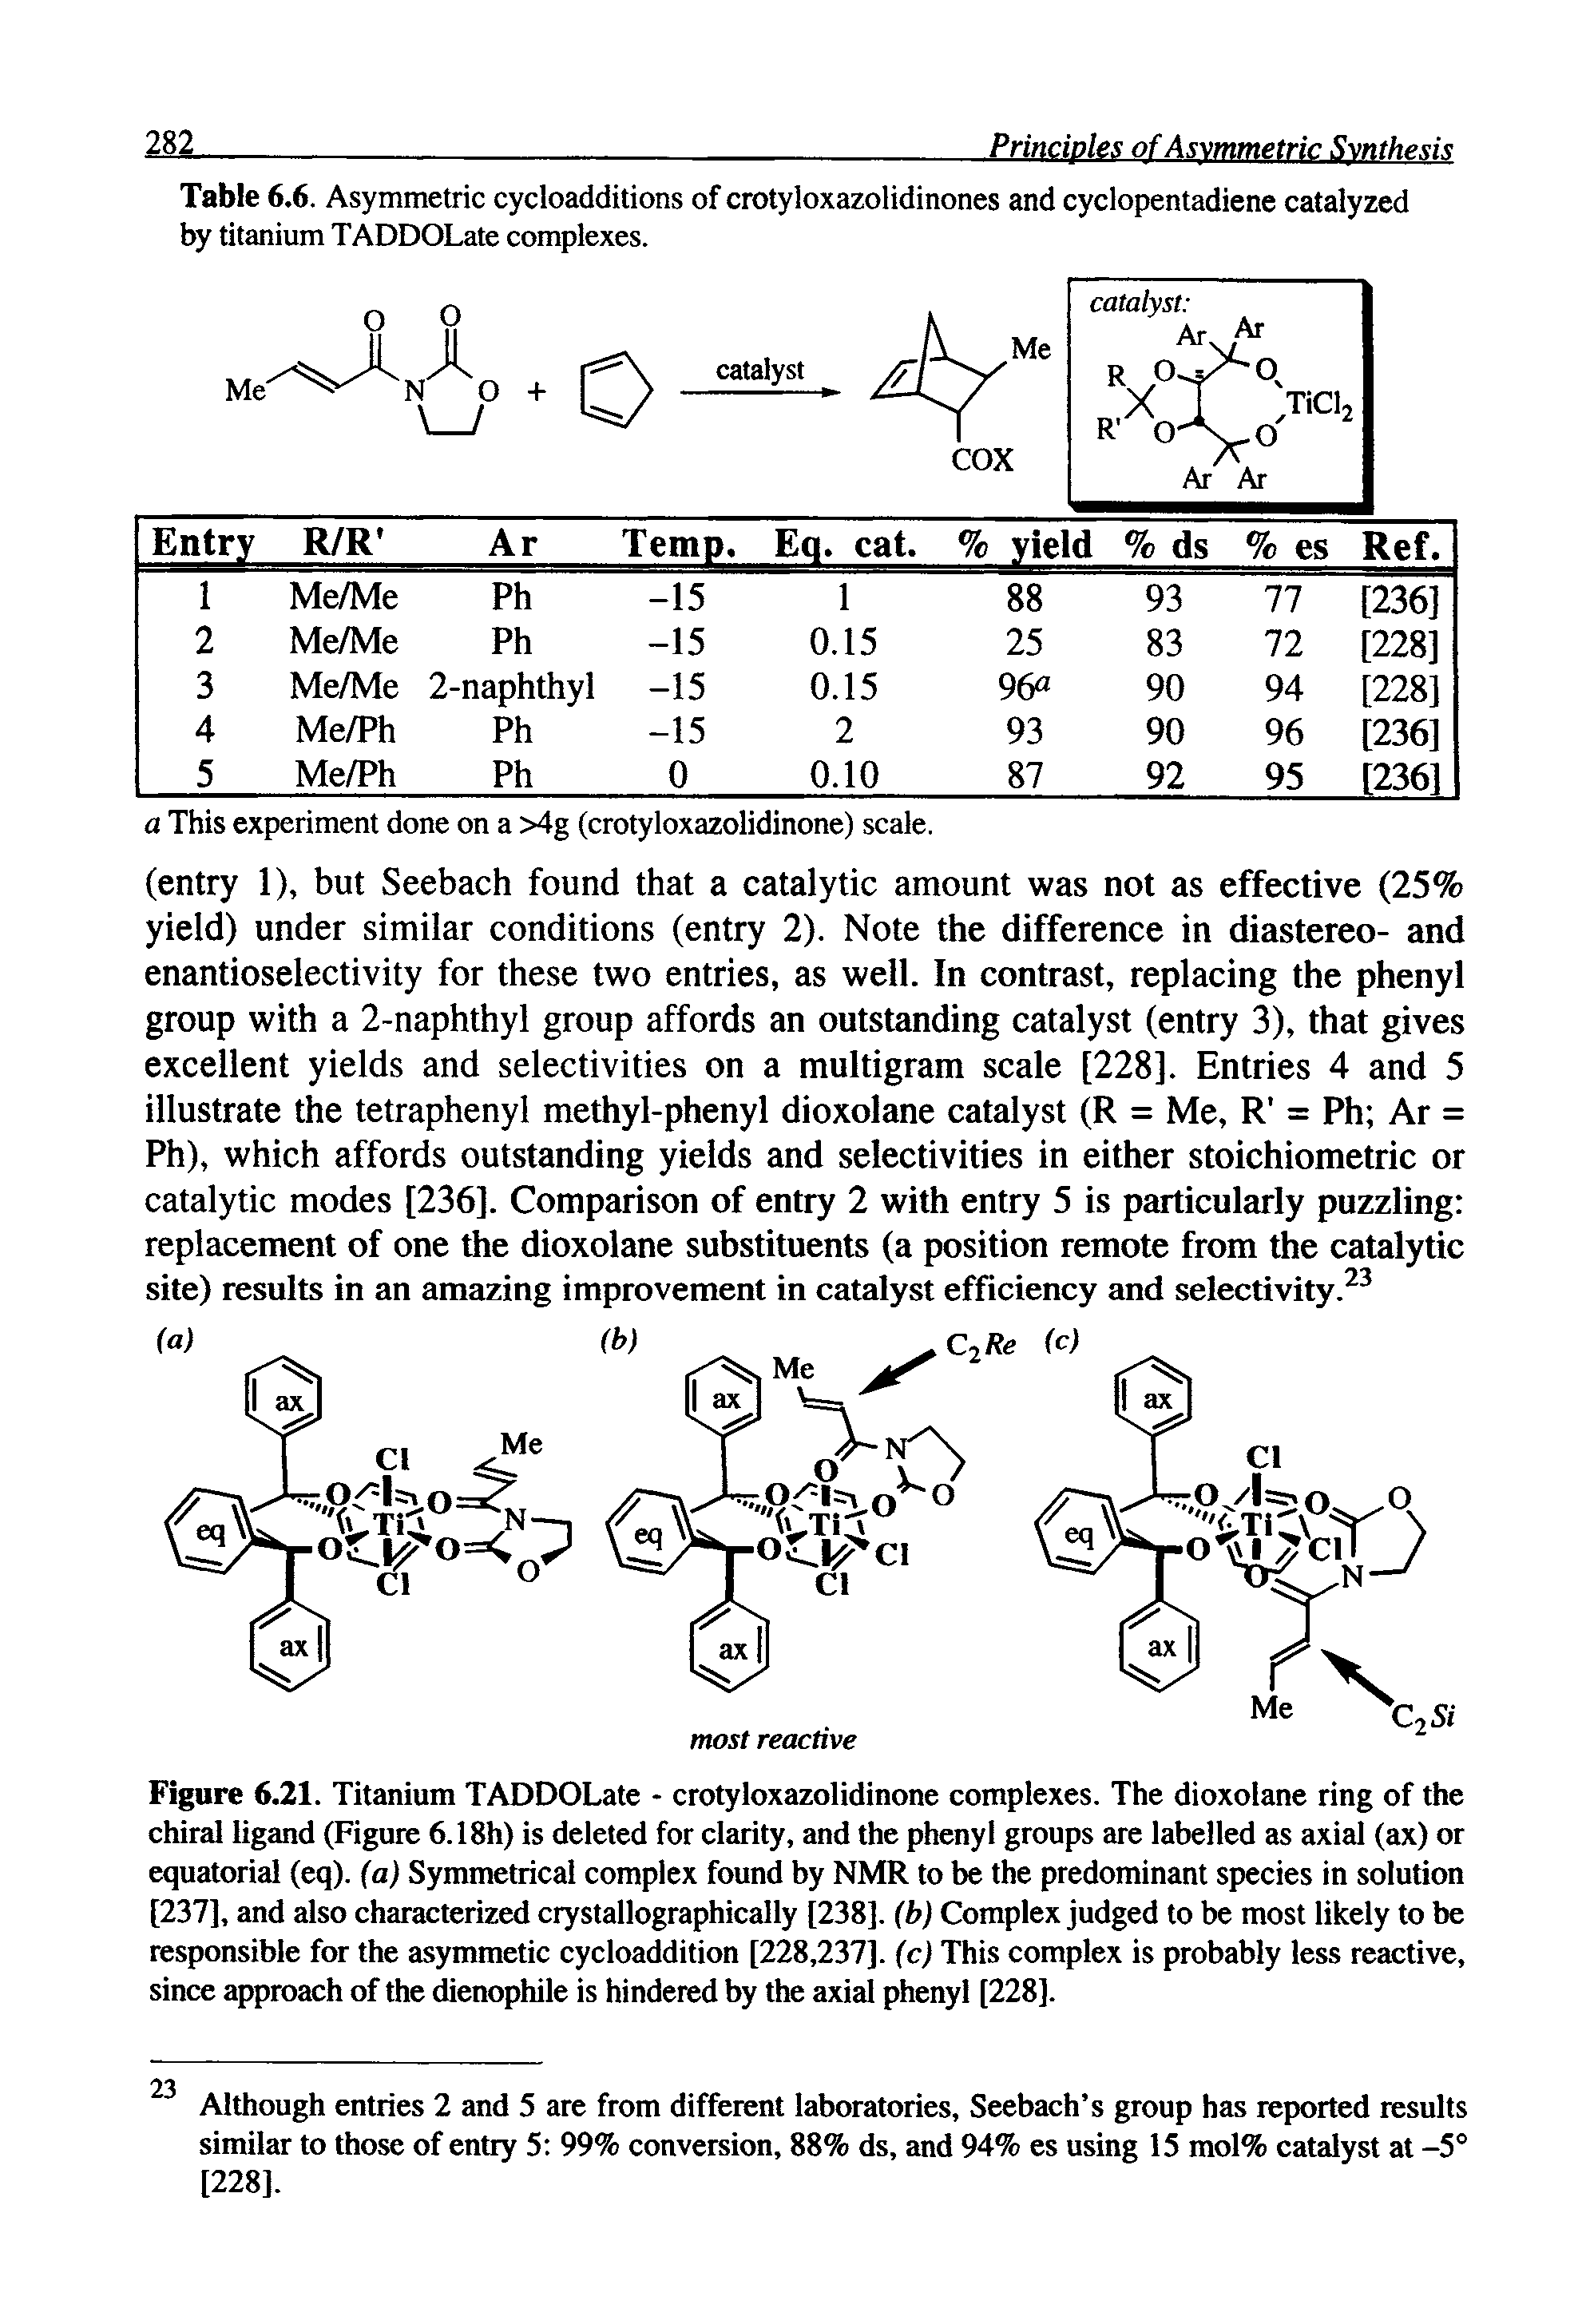 Figure 6.21. Titanium TADDOLate - crotyloxazolidinone complexes. The dioxolane ring of the chiral ligand (Figure 6.18h) is deleted for clarity, and the phenyl groups are labelled as axial (ax) or equatorial (eq). (a) Symmetrical complex found by NMR to be the predominant species in solution [237], and also characterized crystallographically [238]. (b) Complex judged to be most likely to be responsible for the asymmetic cycloaddition [228,237]. (c) This complex is probably less reactive, since approach of the dienophile is hindered by the axial phenyl [228].